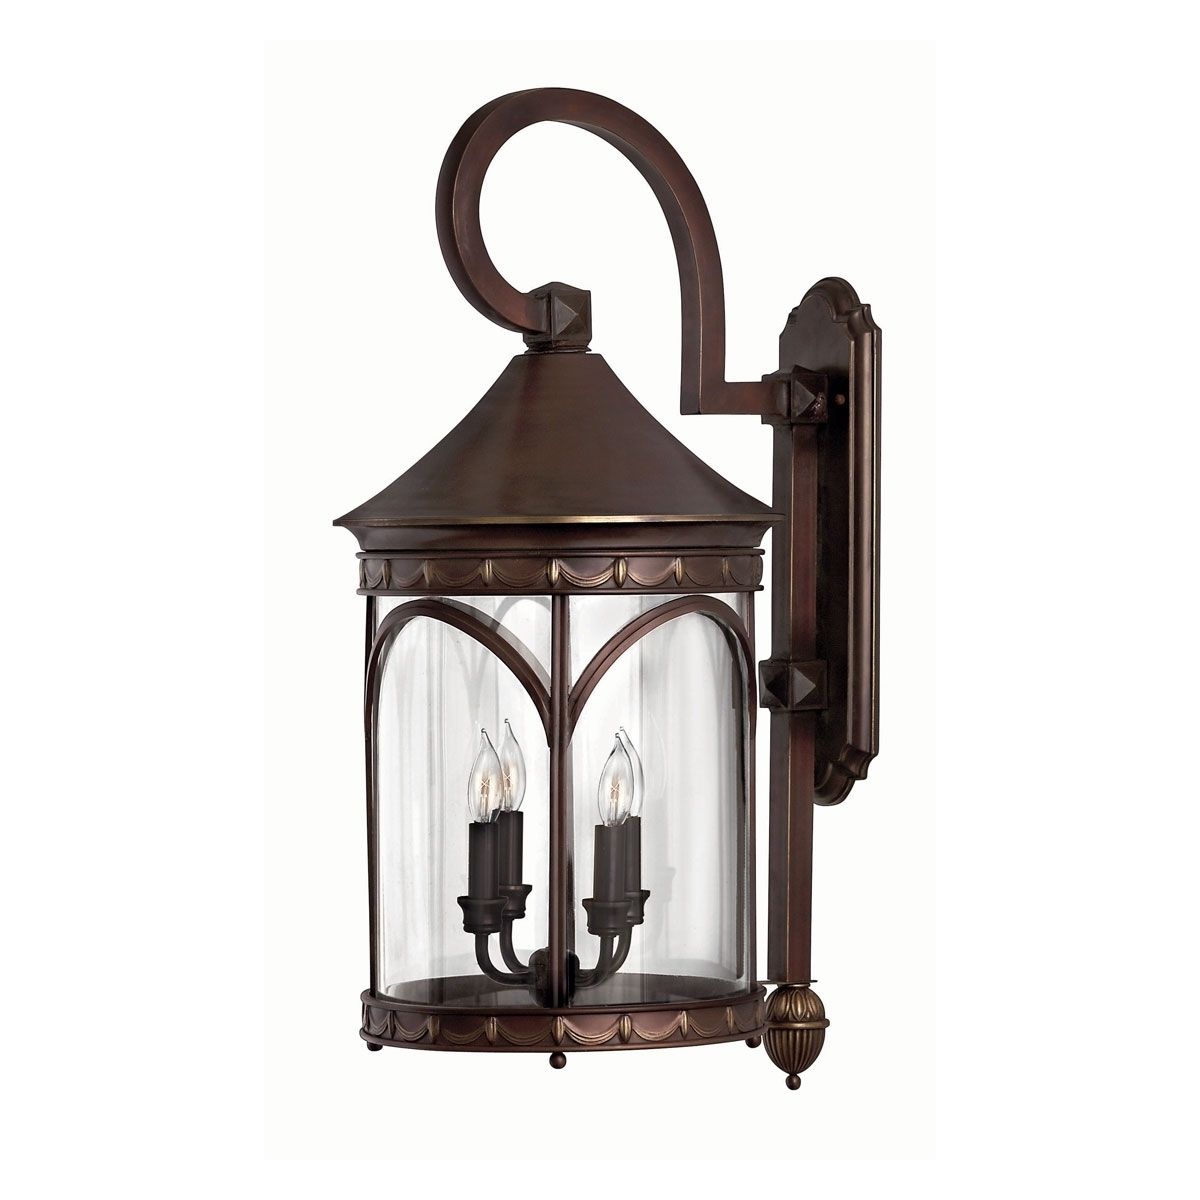 Large Rustic Outdoor Wall Lights Extra Lanterns Light Lantern Candle Inside Large Outdoor Rustic Lanterns (Photo 10 of 20)